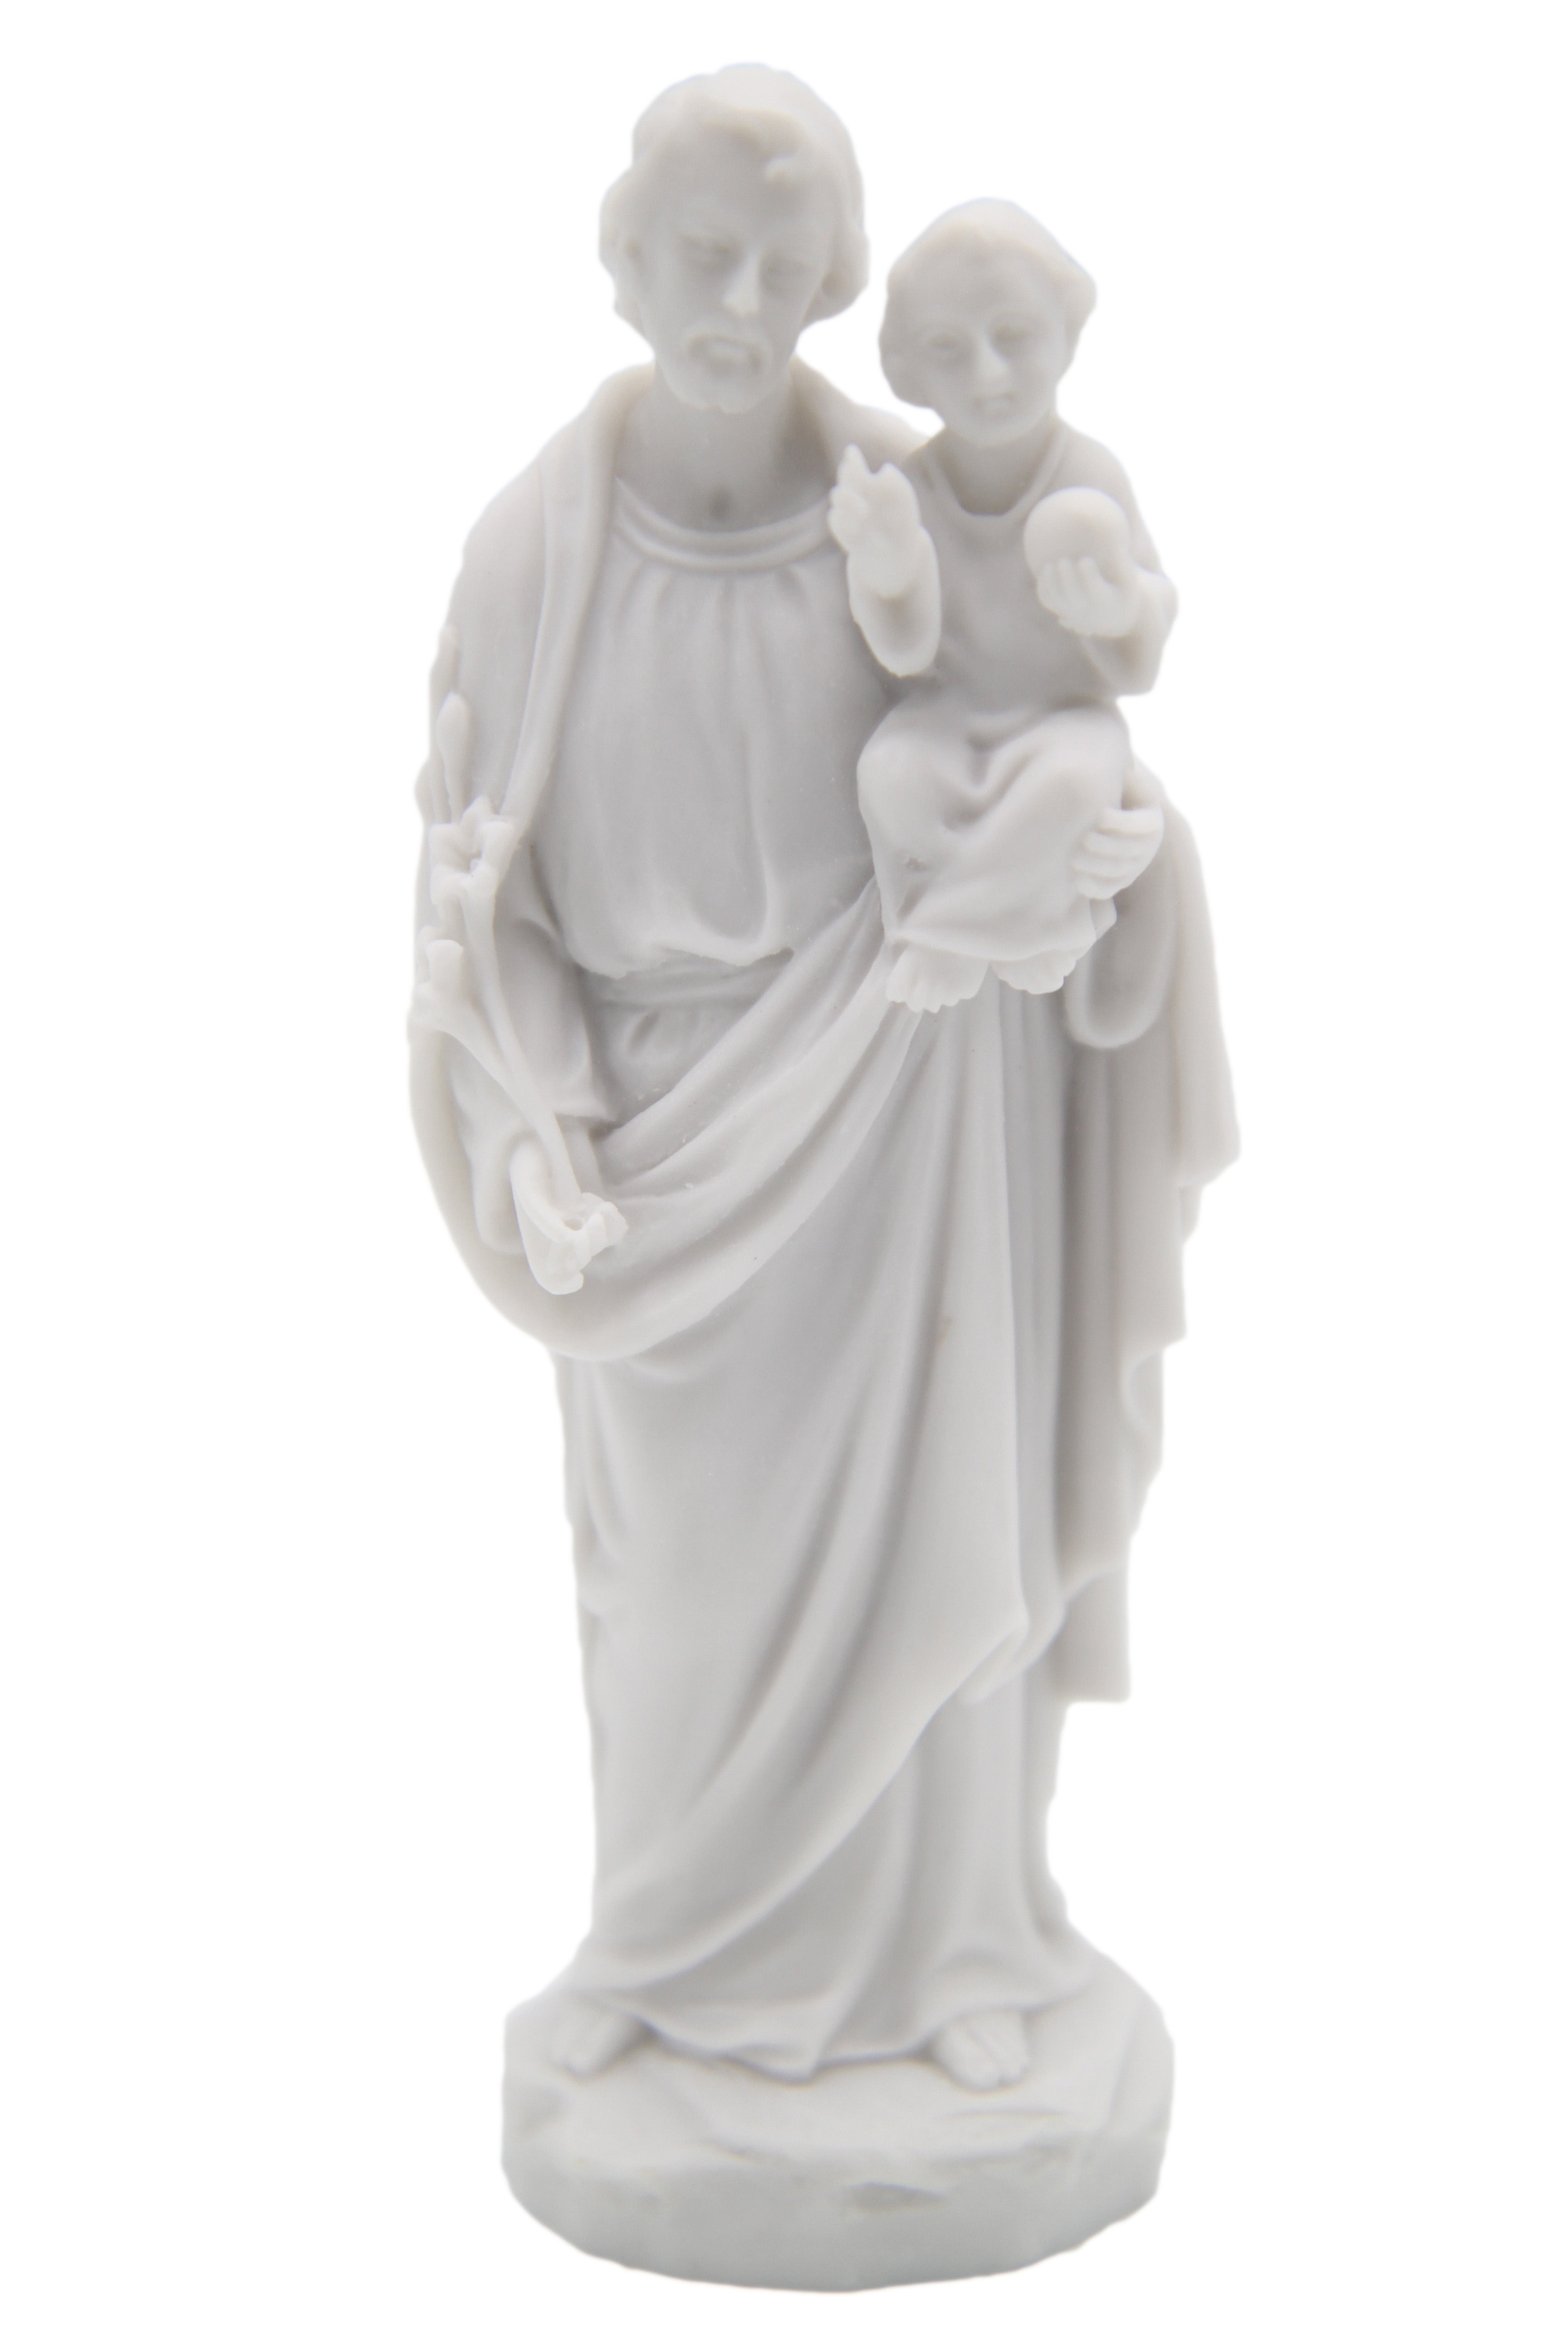 5 Inch Saint Joseph with Baby Jesus Catholic Statue Vittoria Collection Made in Italy